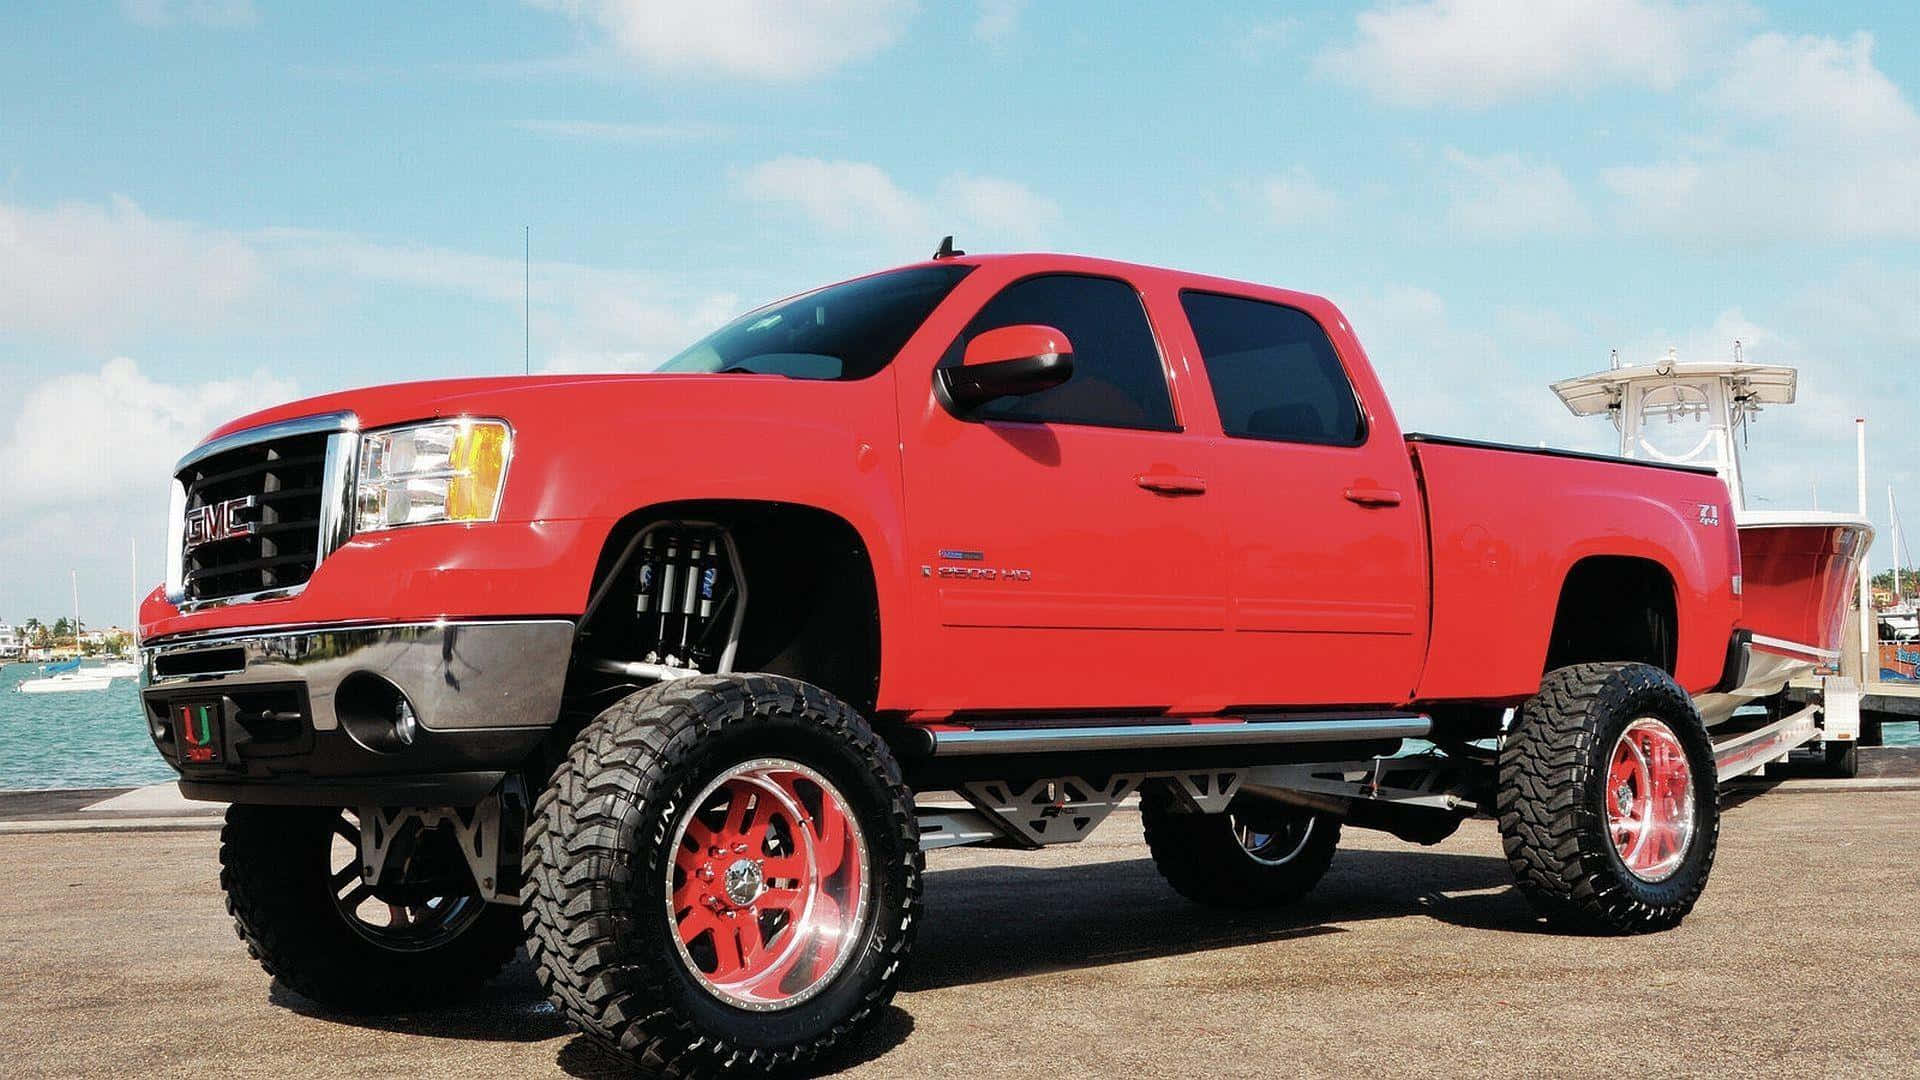 A Red Truck With A Large Set Of Wheels Wallpaper